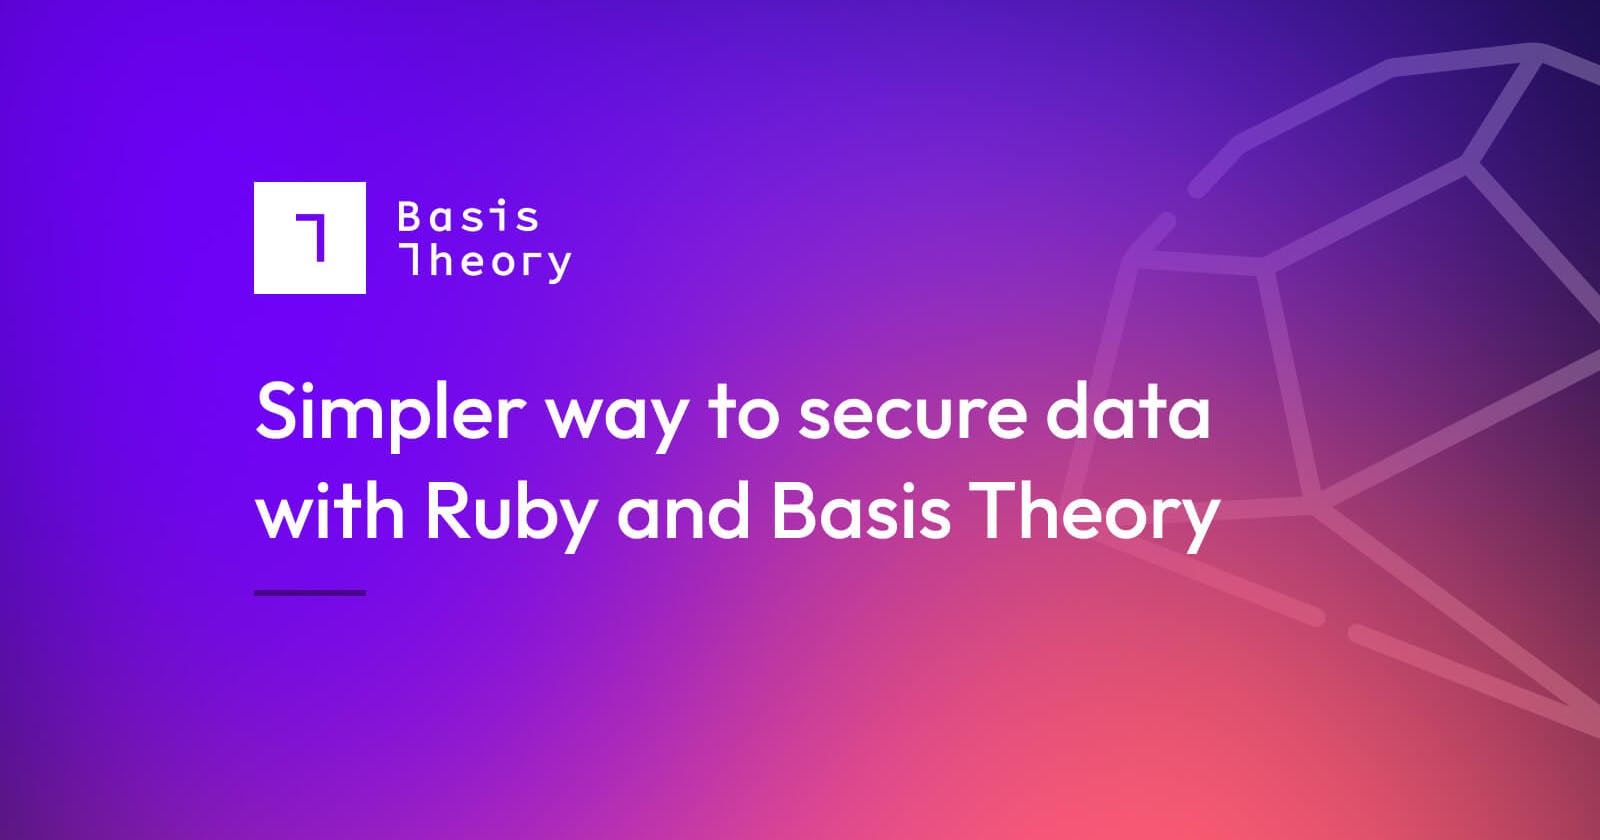 Simpler way to secure data with Ruby and Basis Theory